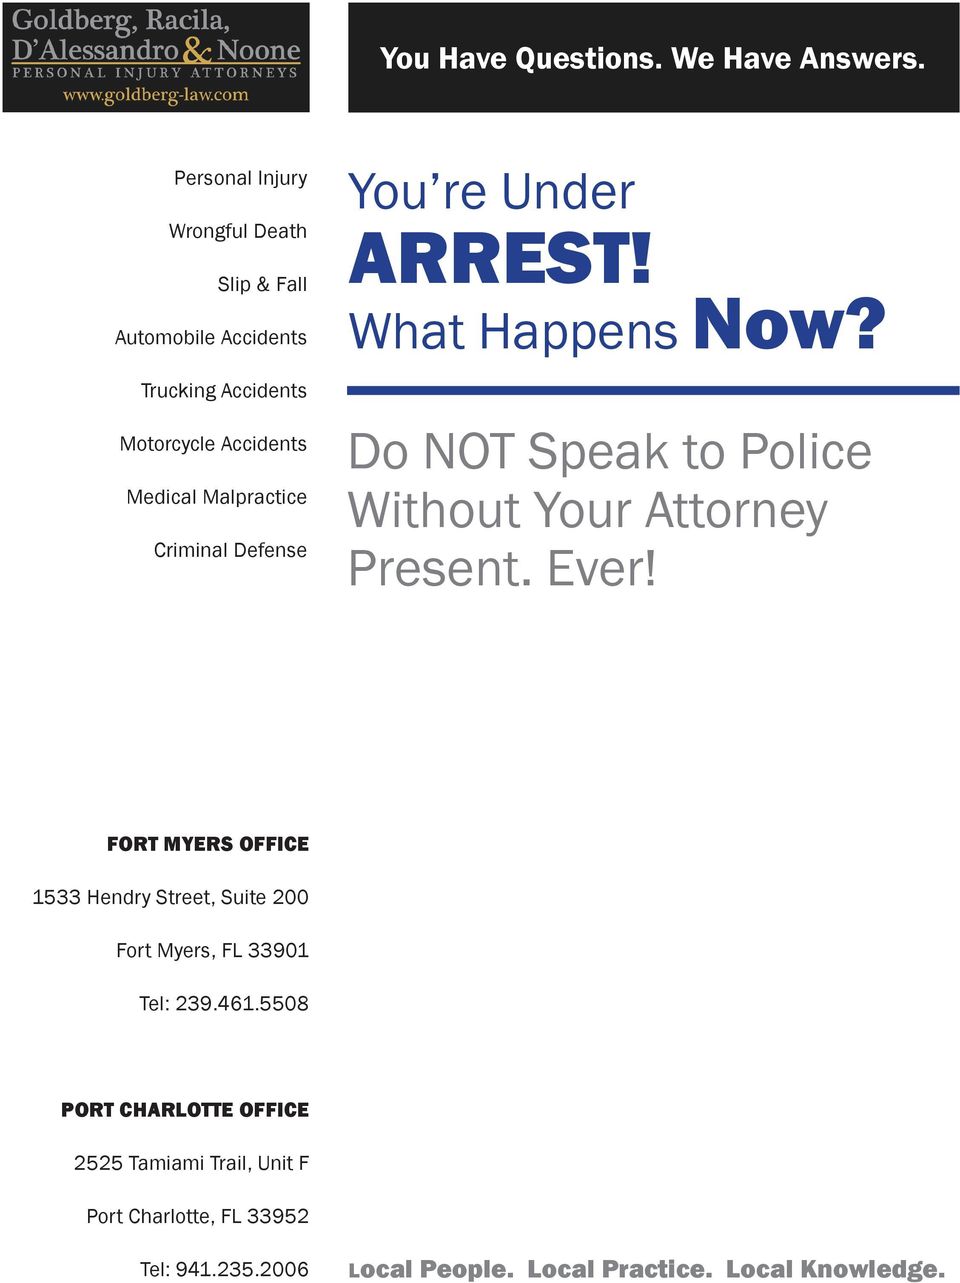 Do NOT Speak to Police Without Your Attorney Present. Ever!